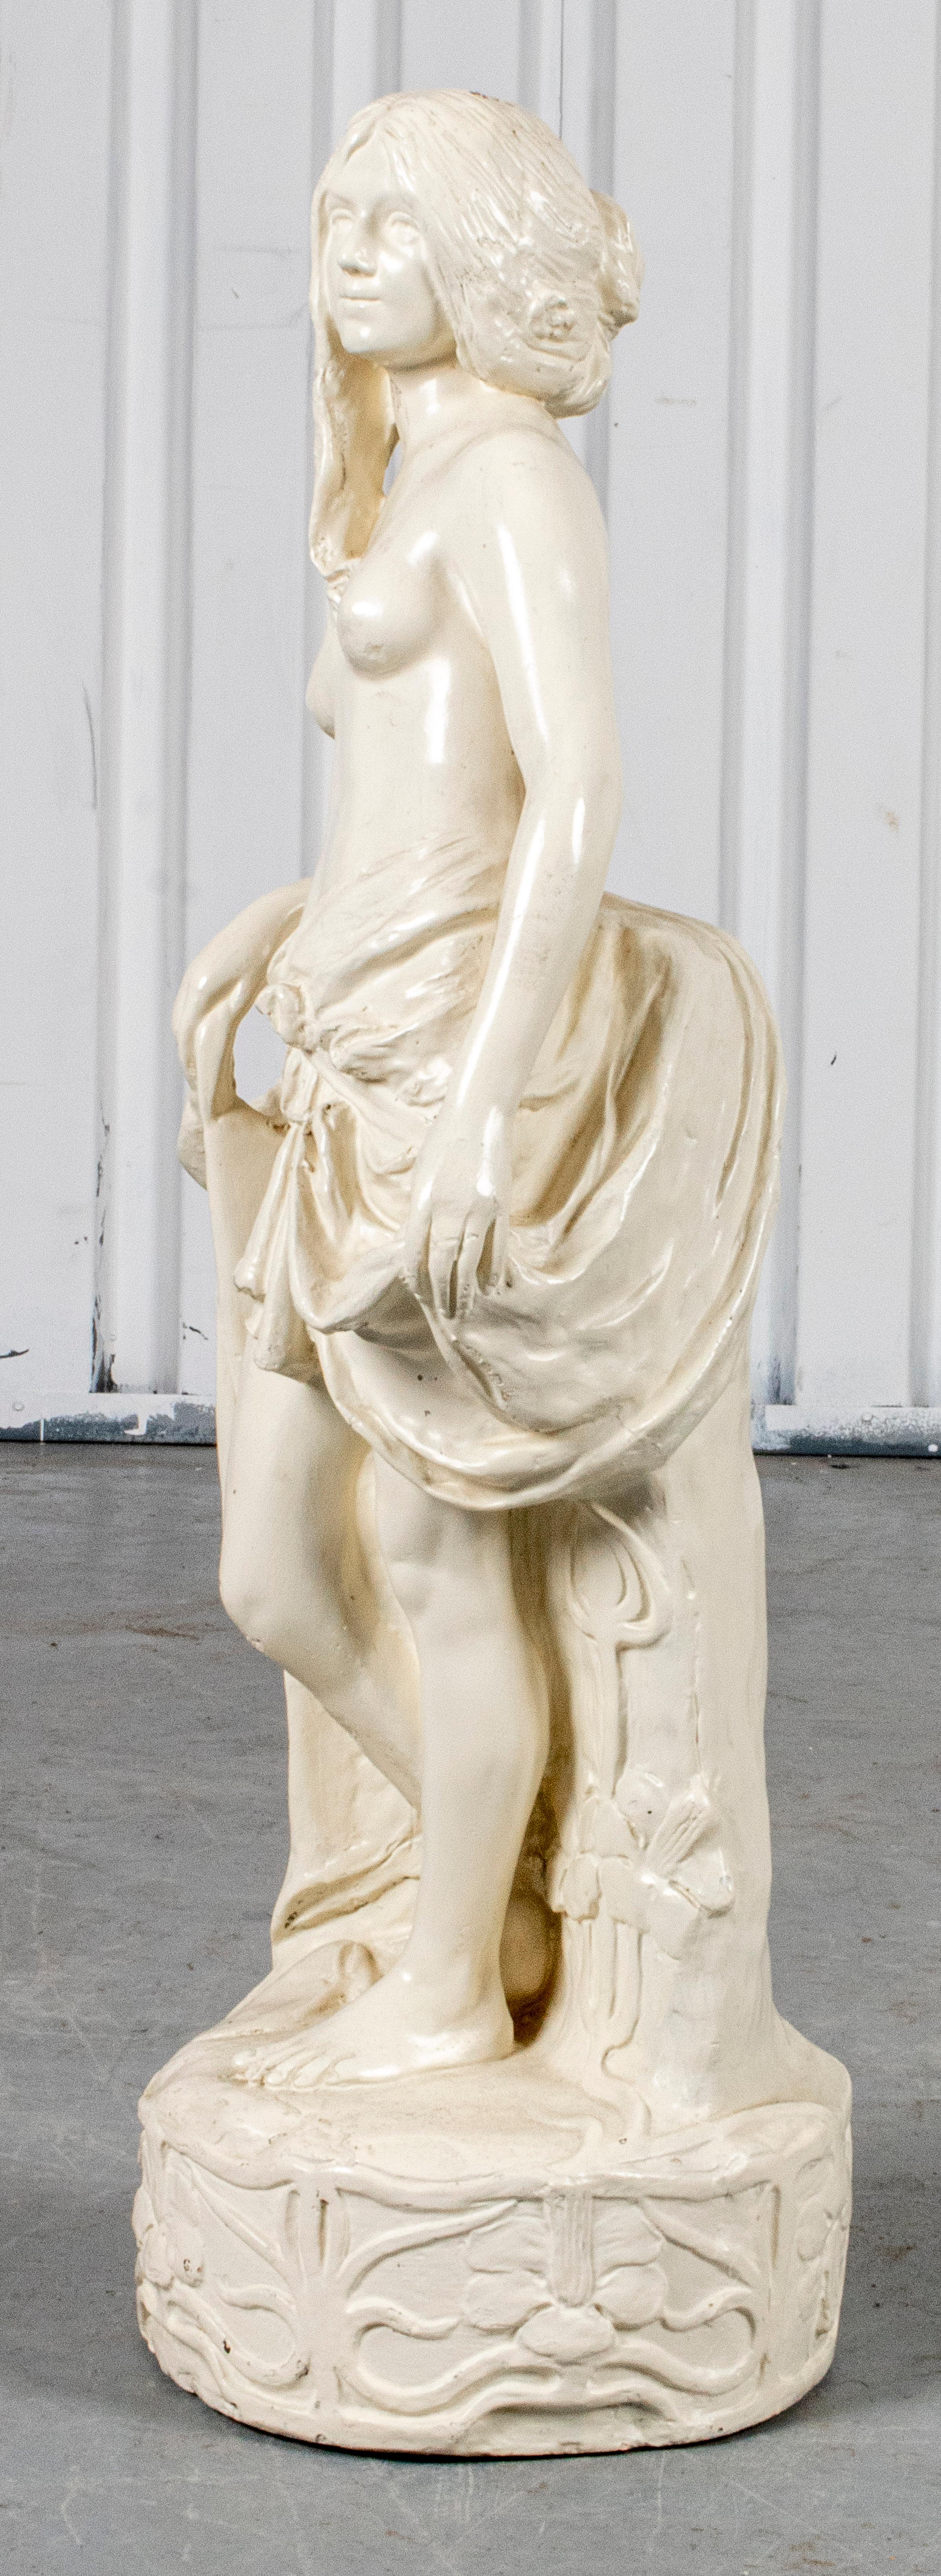 Art Nouveau style composition figure of a maiden, after the antique, the statue modeled with partially draped robe in a landscape, illegibly signed to base and with impressed numerals. 33.5” height x 12” diameter.